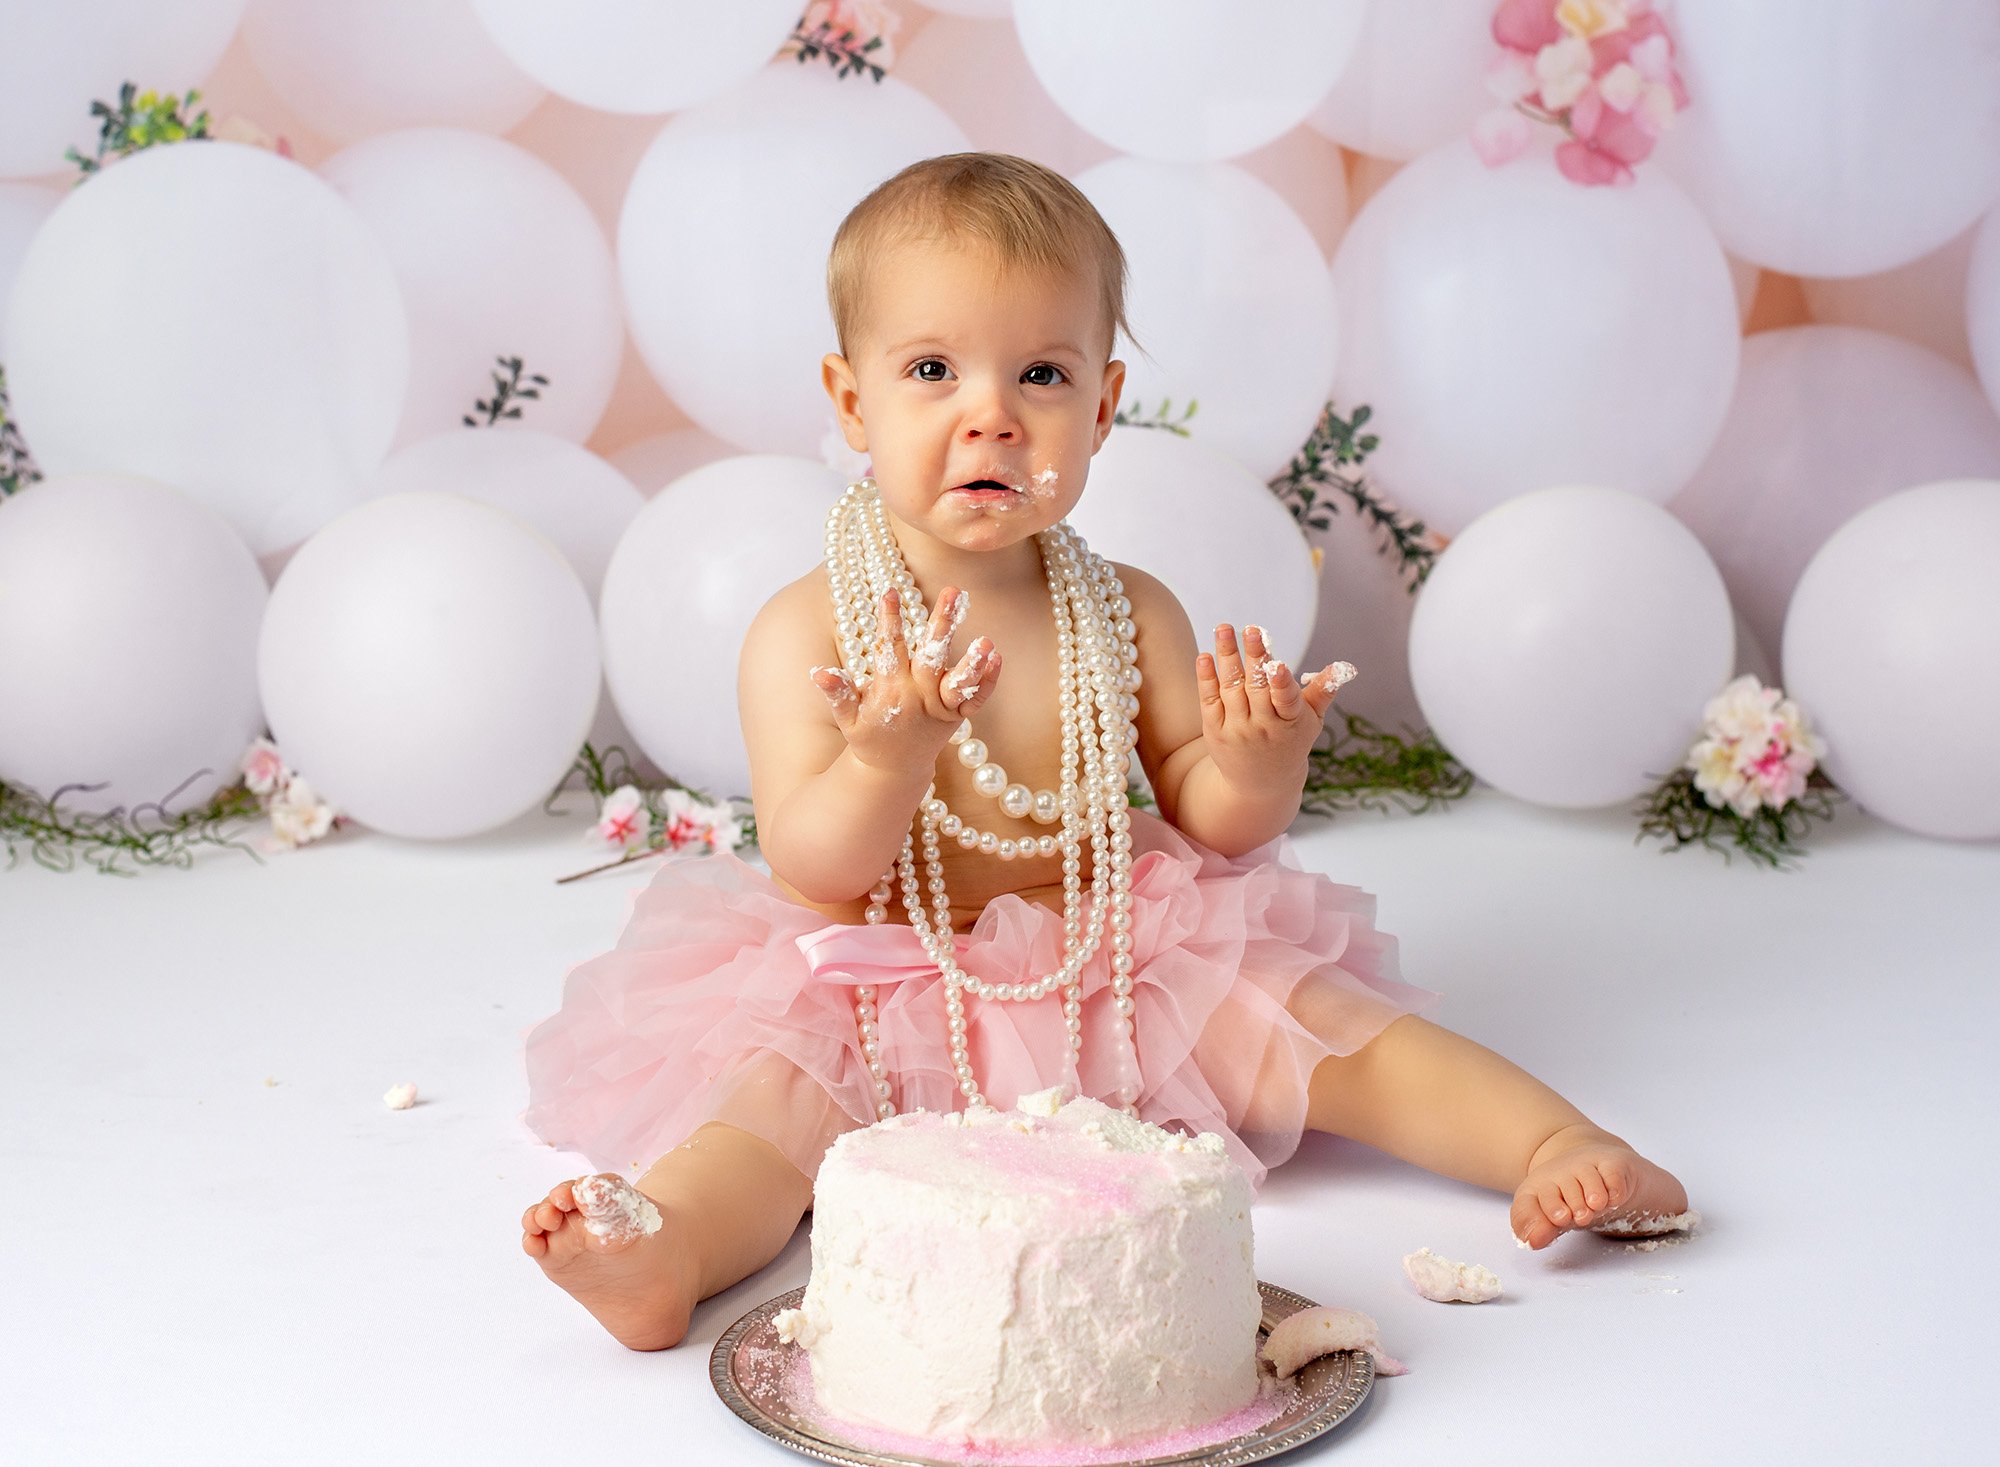 baby girl wearing layered pearl necklace sitting in front of cake with frosting on hands with white balloons in background